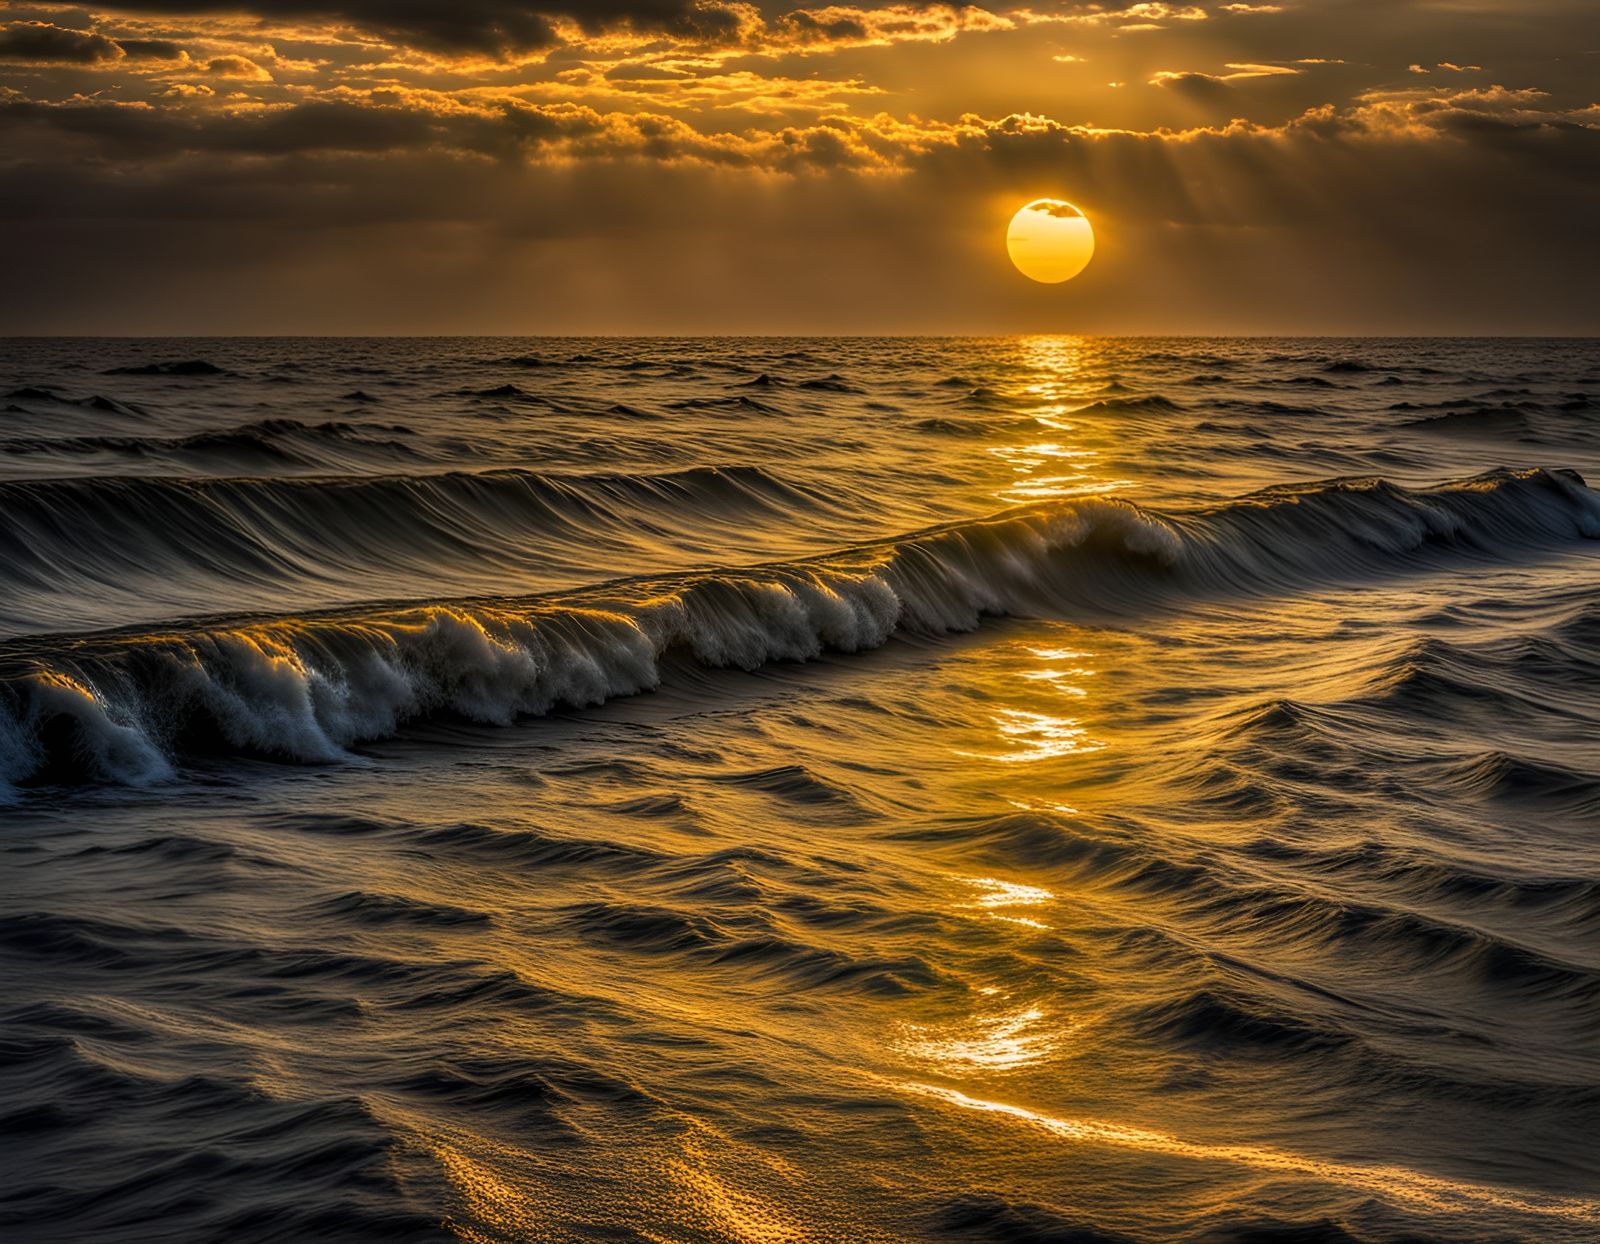 A Yellow Sun Reflecting Yellow on the Ocean